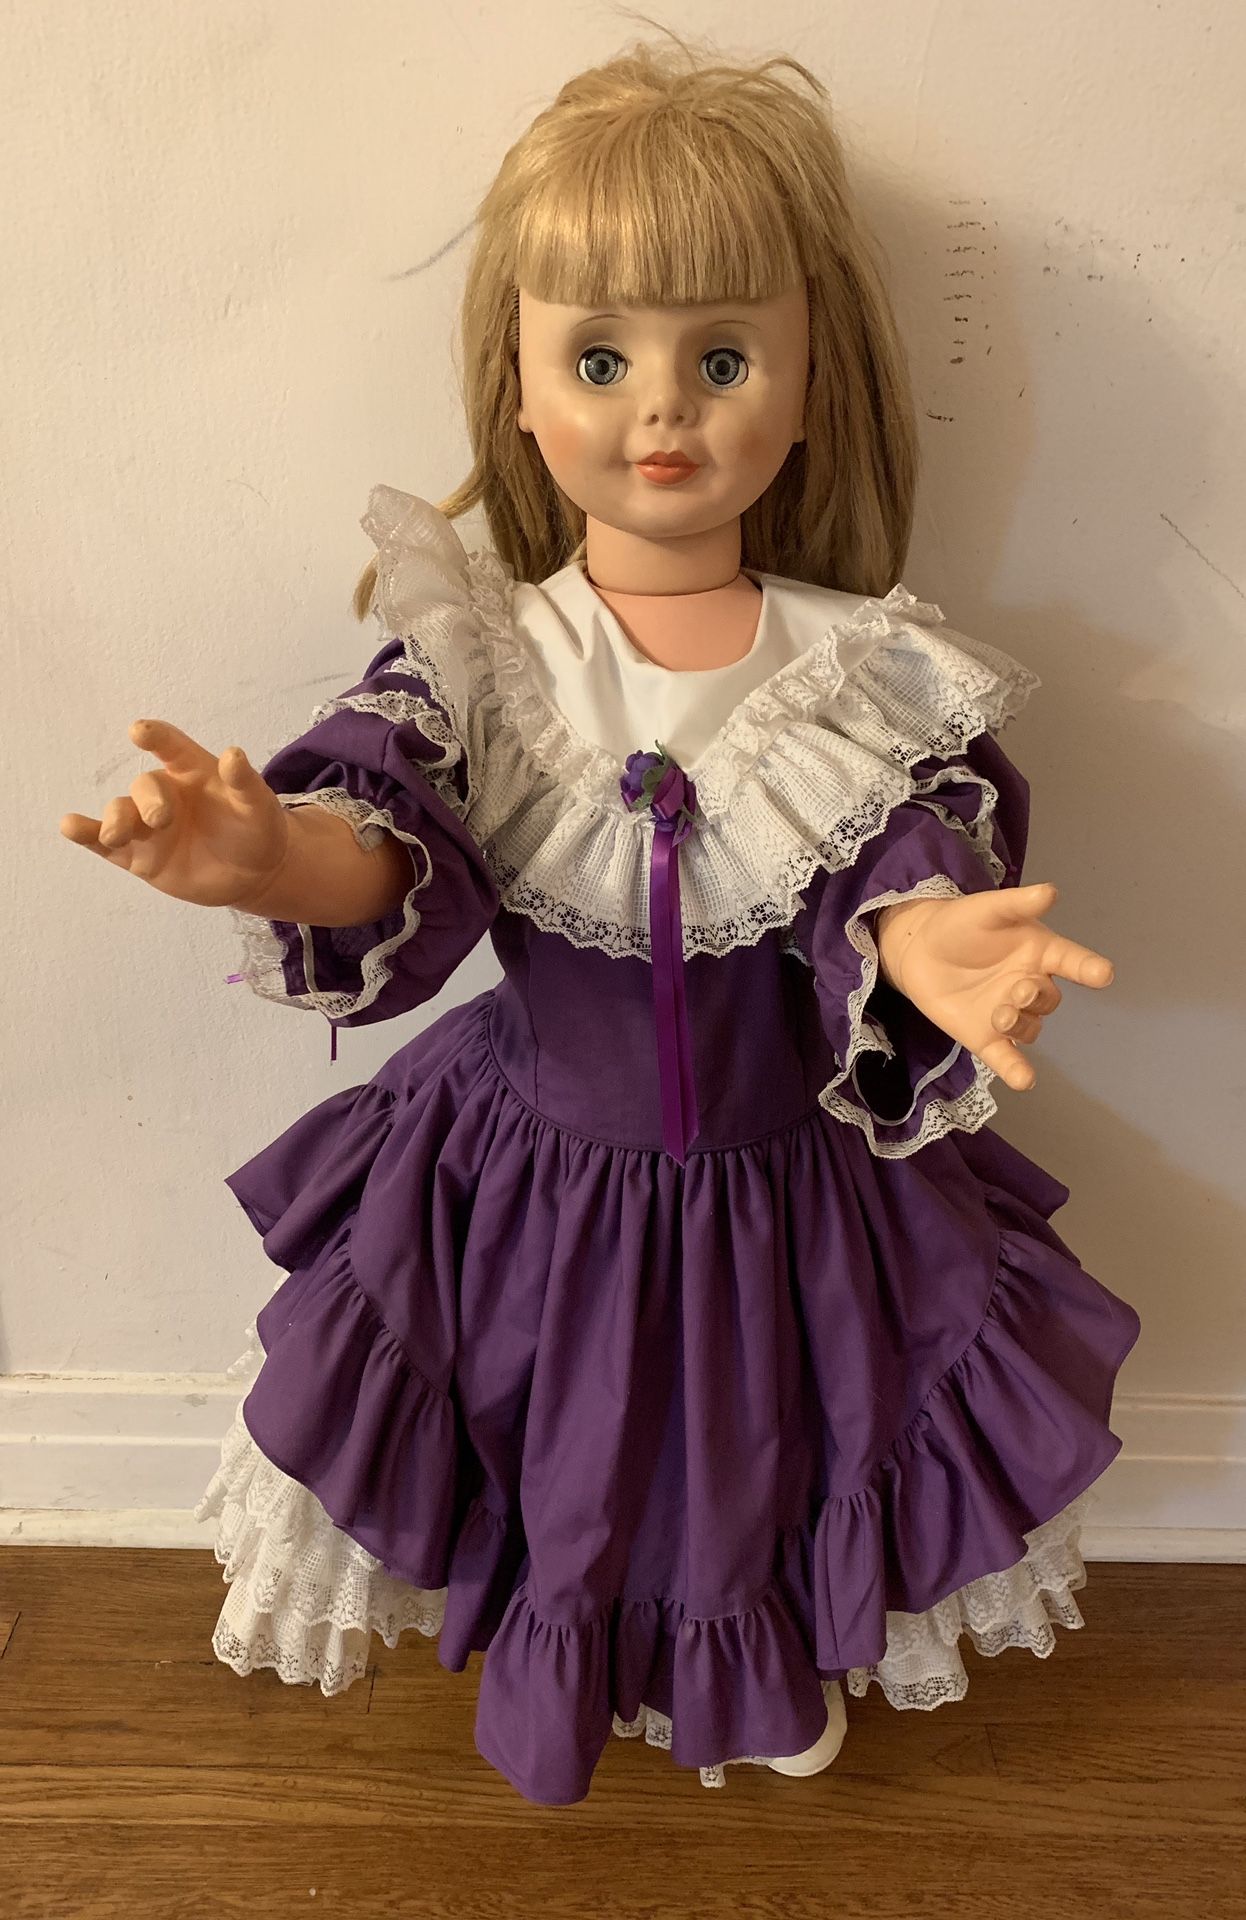 Vintage Life Size Doll from 1960’s